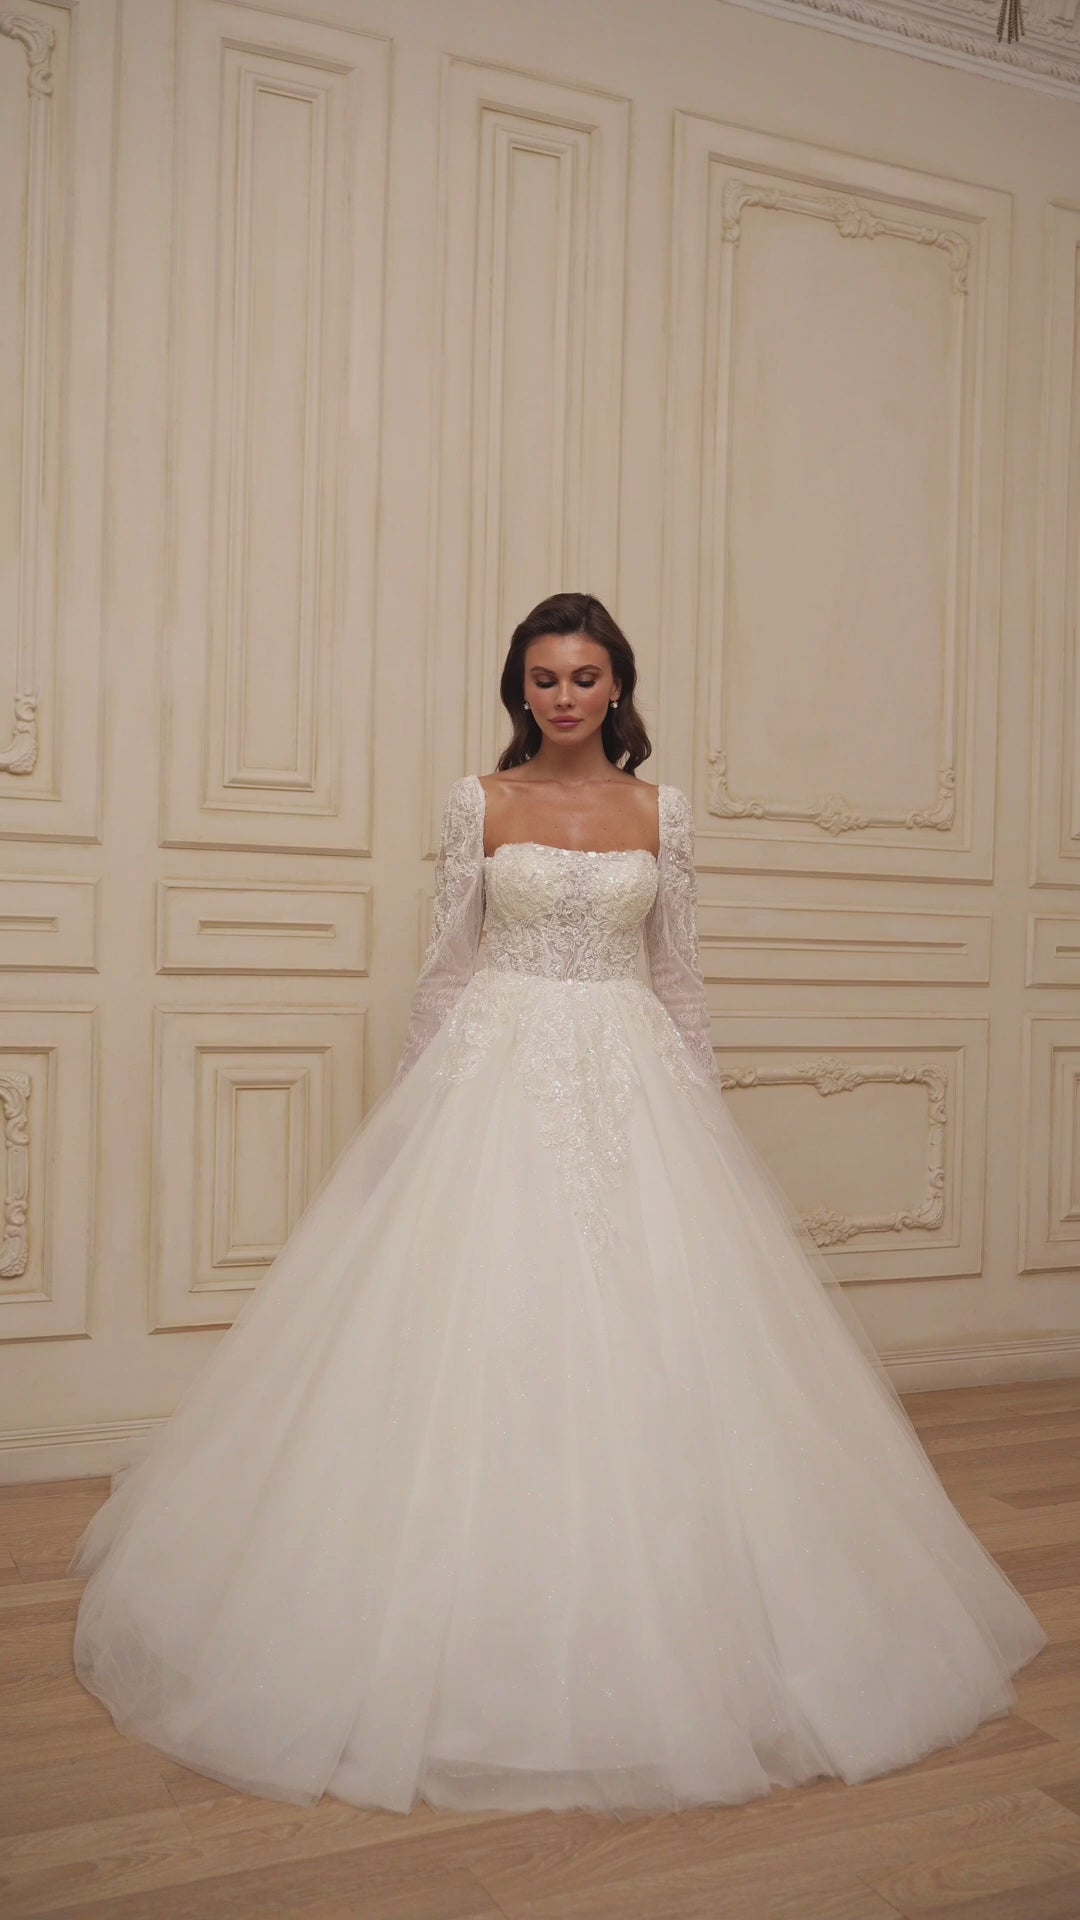 Elegant Ball Gown Wedding Dress with Lace Appliqués and Sweetheart Neckline Plus Size